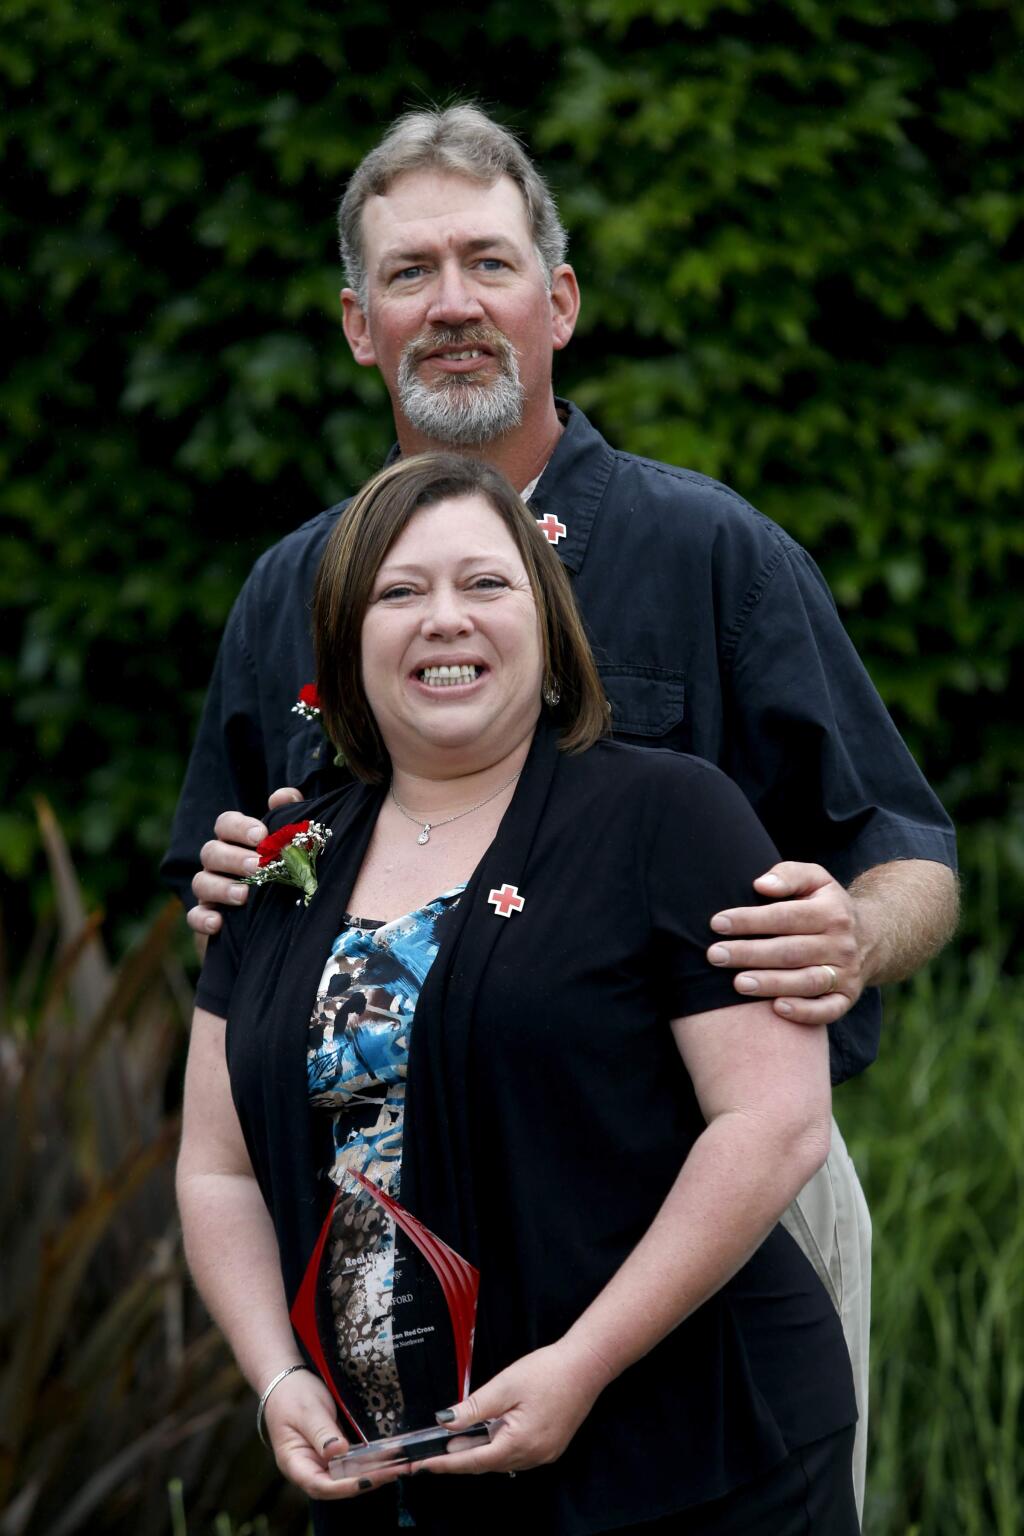 Lisa Lunsford and her husband Troy were honored as the Act of Courage Heros for saving the lives of two elderly women who needed to be rescued from their homes during the Valley Fire. Photo taken at the Red Cross's 13th Annual Real Heroes breakfast at the DoubleTree in Rohnert Park, on Thursday, April 21, 2016. (BETH SCHLANKER/ The Press Democrat)